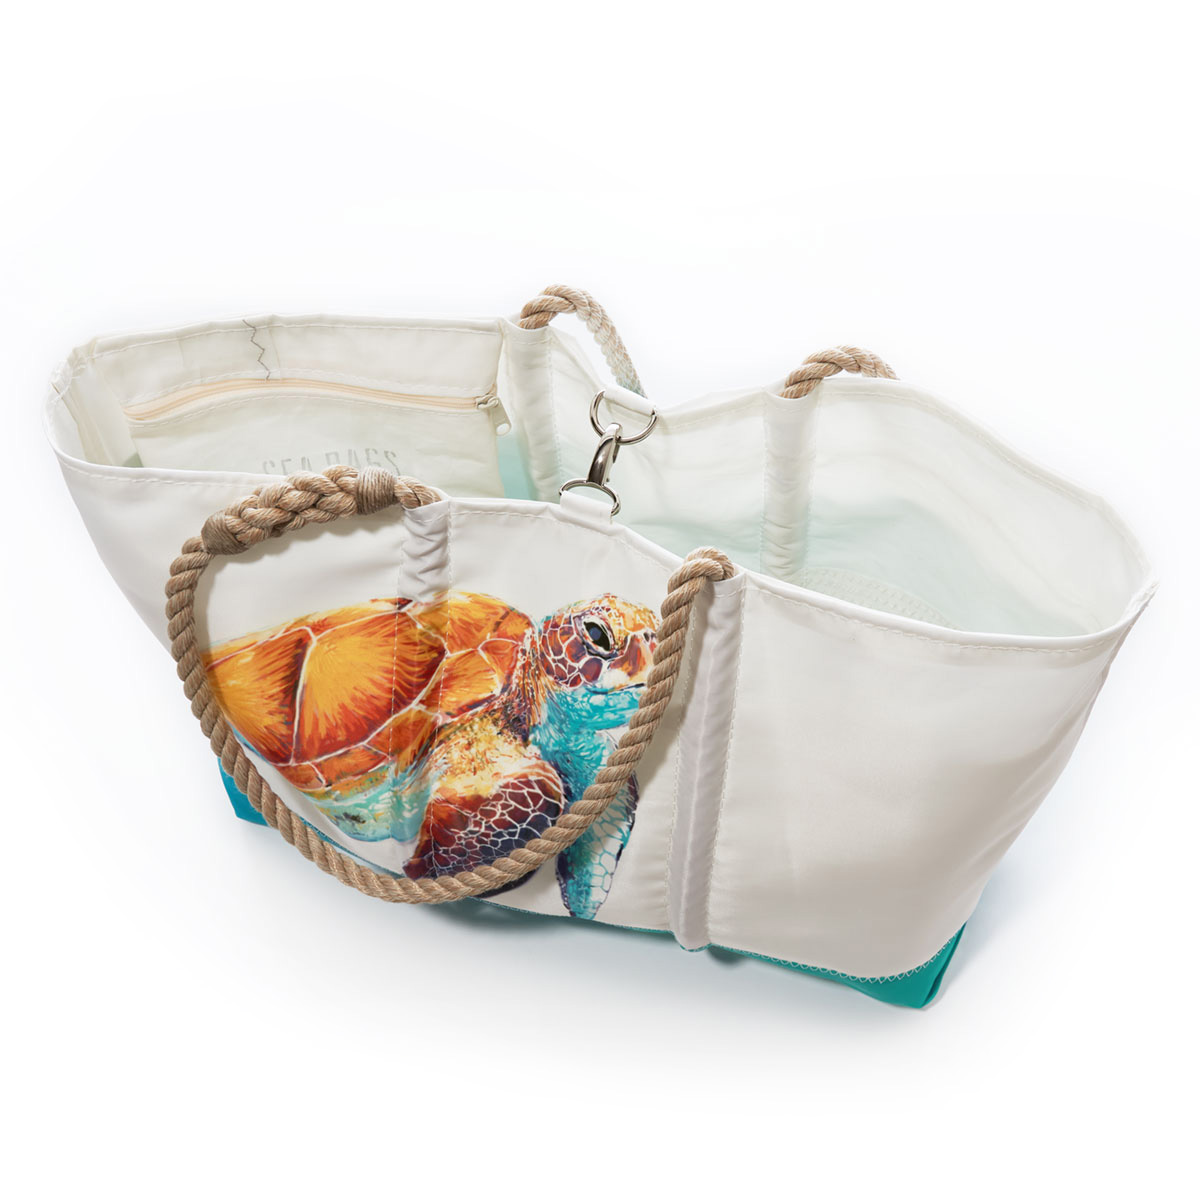 clasp closure of a white recycled sail cloth beach tote with hemp rope handles and a teal wraparound back pocket is printed with a bright friendly multicolor sea turtle